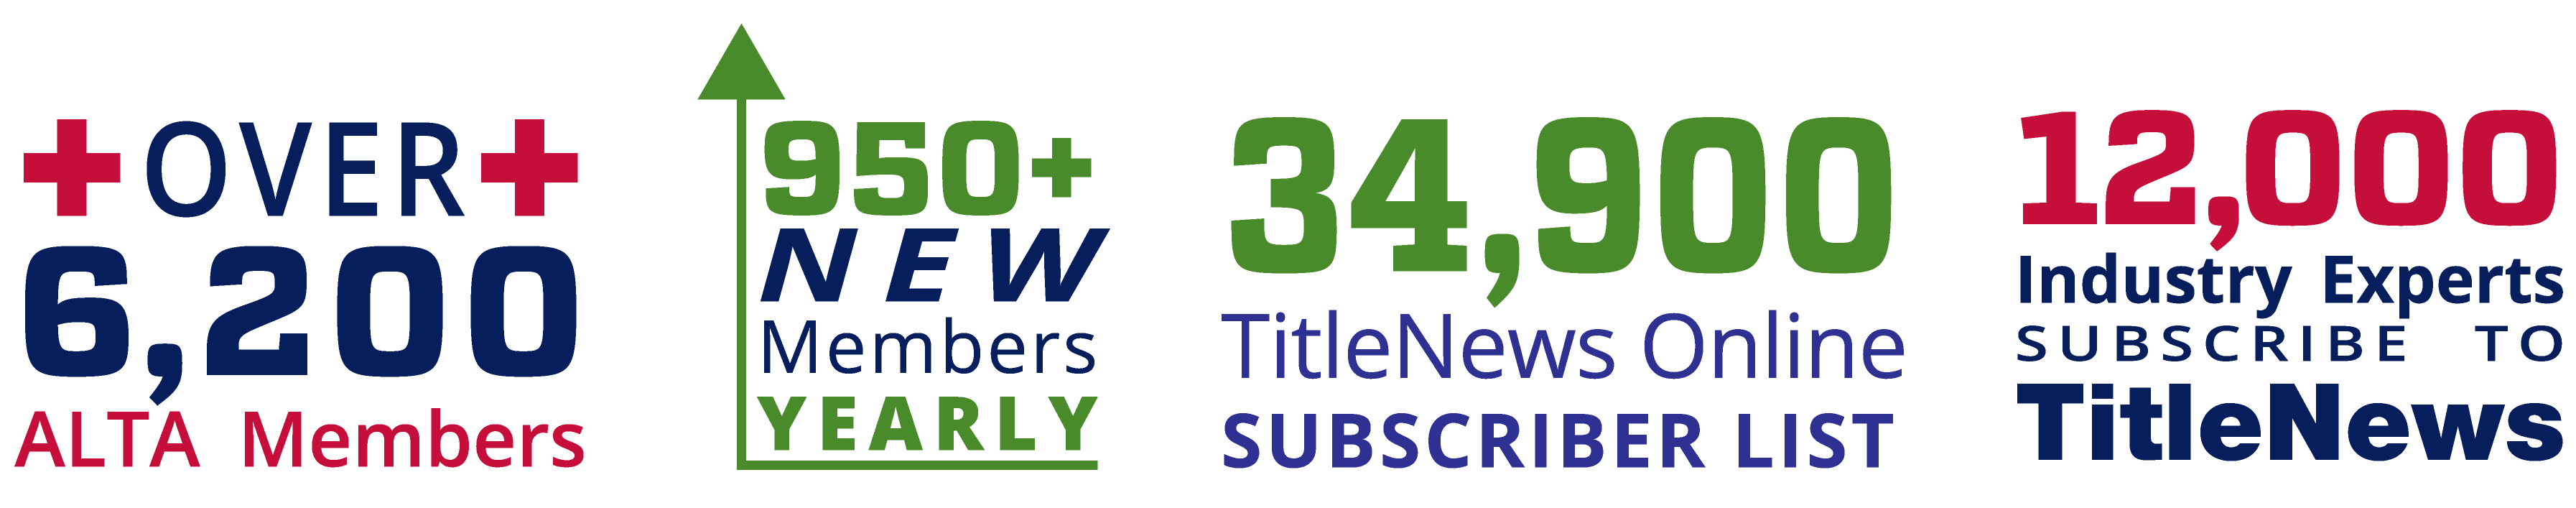 Over 6,200 ALTA Members; Over 950 New Members Yearly; 34,900 List of readers for TitleNews Online; 12,000 TitleNews Subscriber list of Industry Experts